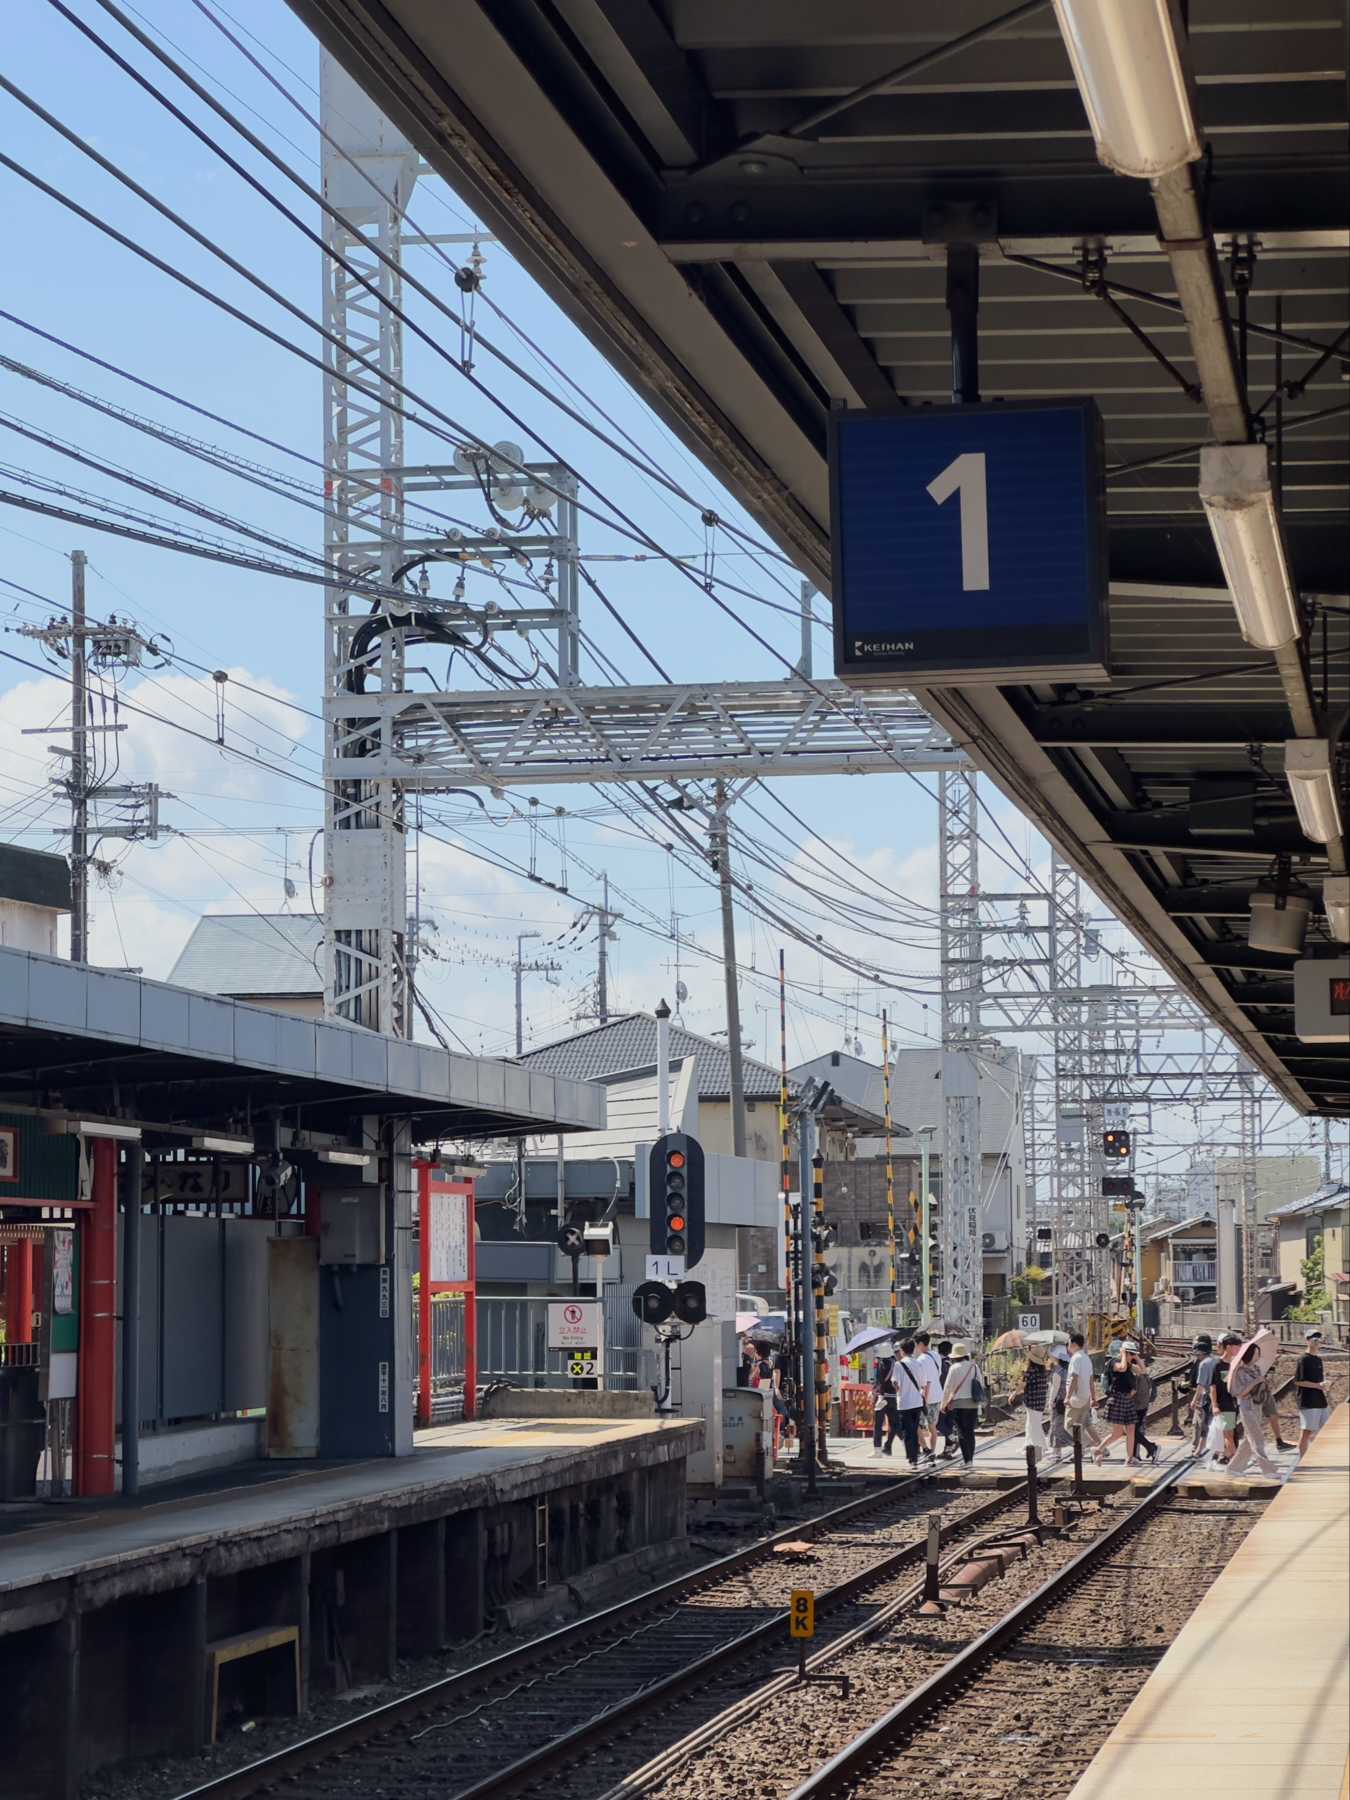 A train station platform with passengers, overhead electrical lines, signal lights, and surrounding urban buildings under a clear sky. A sign with the number &ldquo;1&rdquo; indicates the platform number.